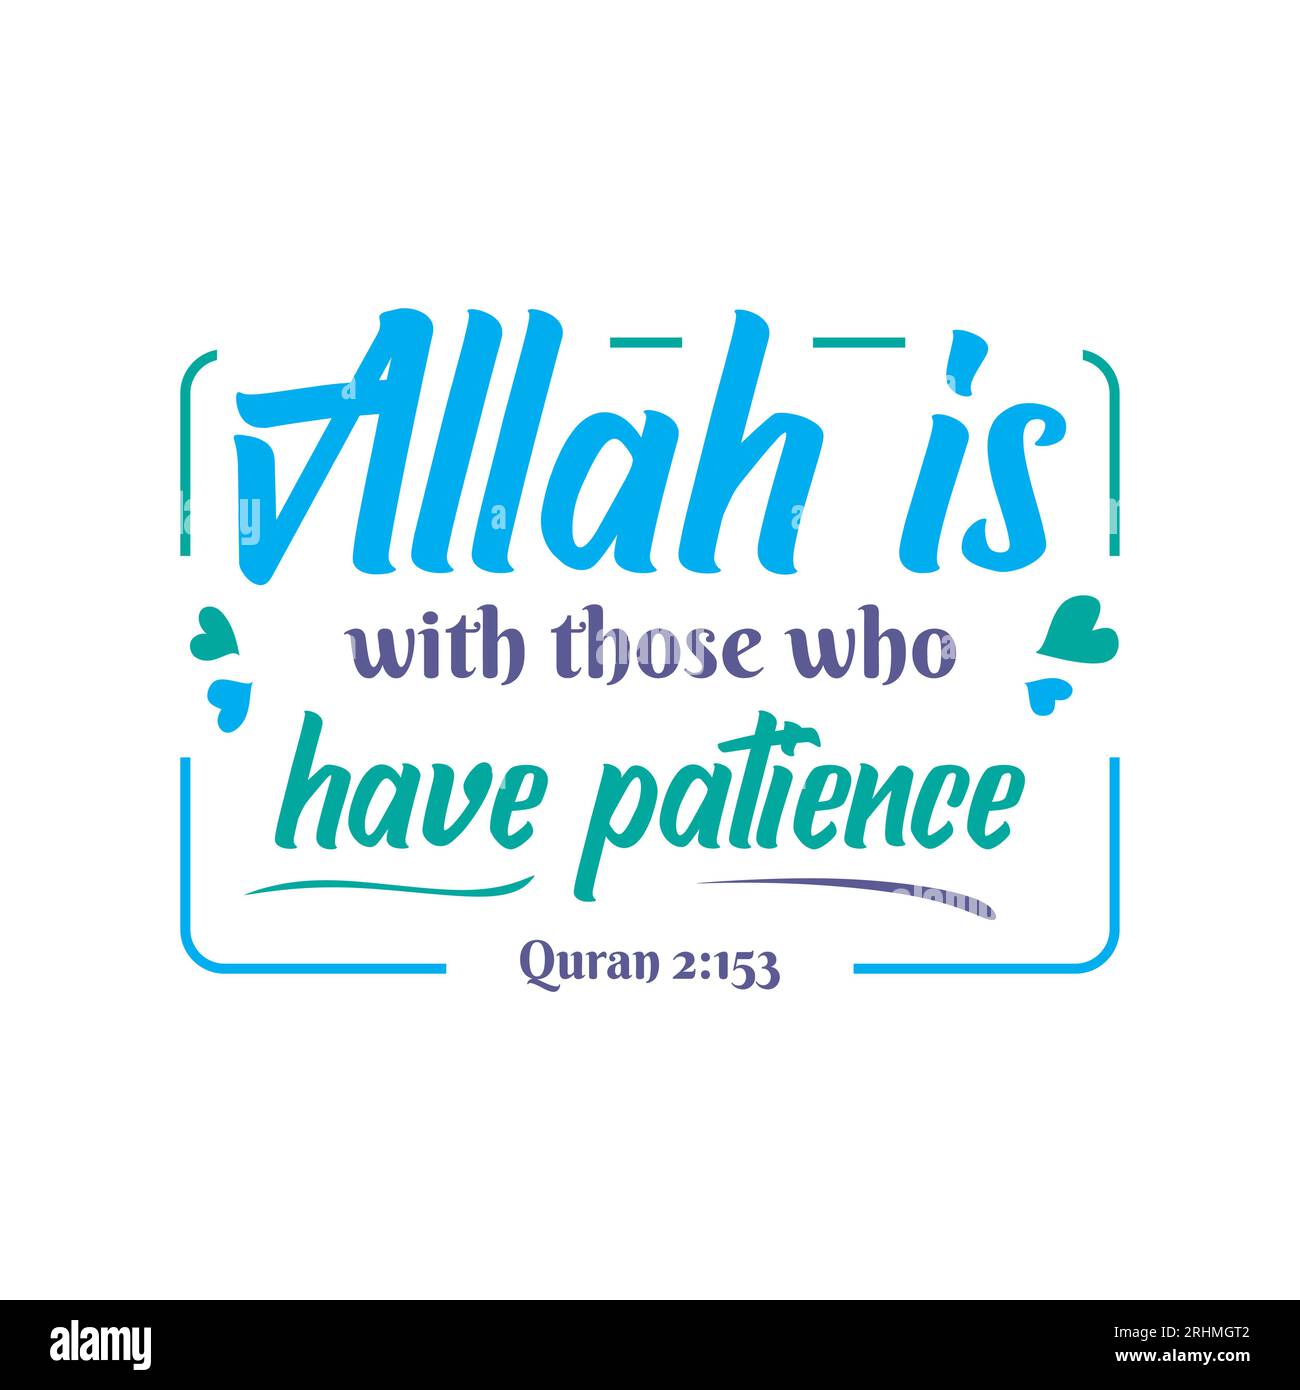 islamic sayings about patience